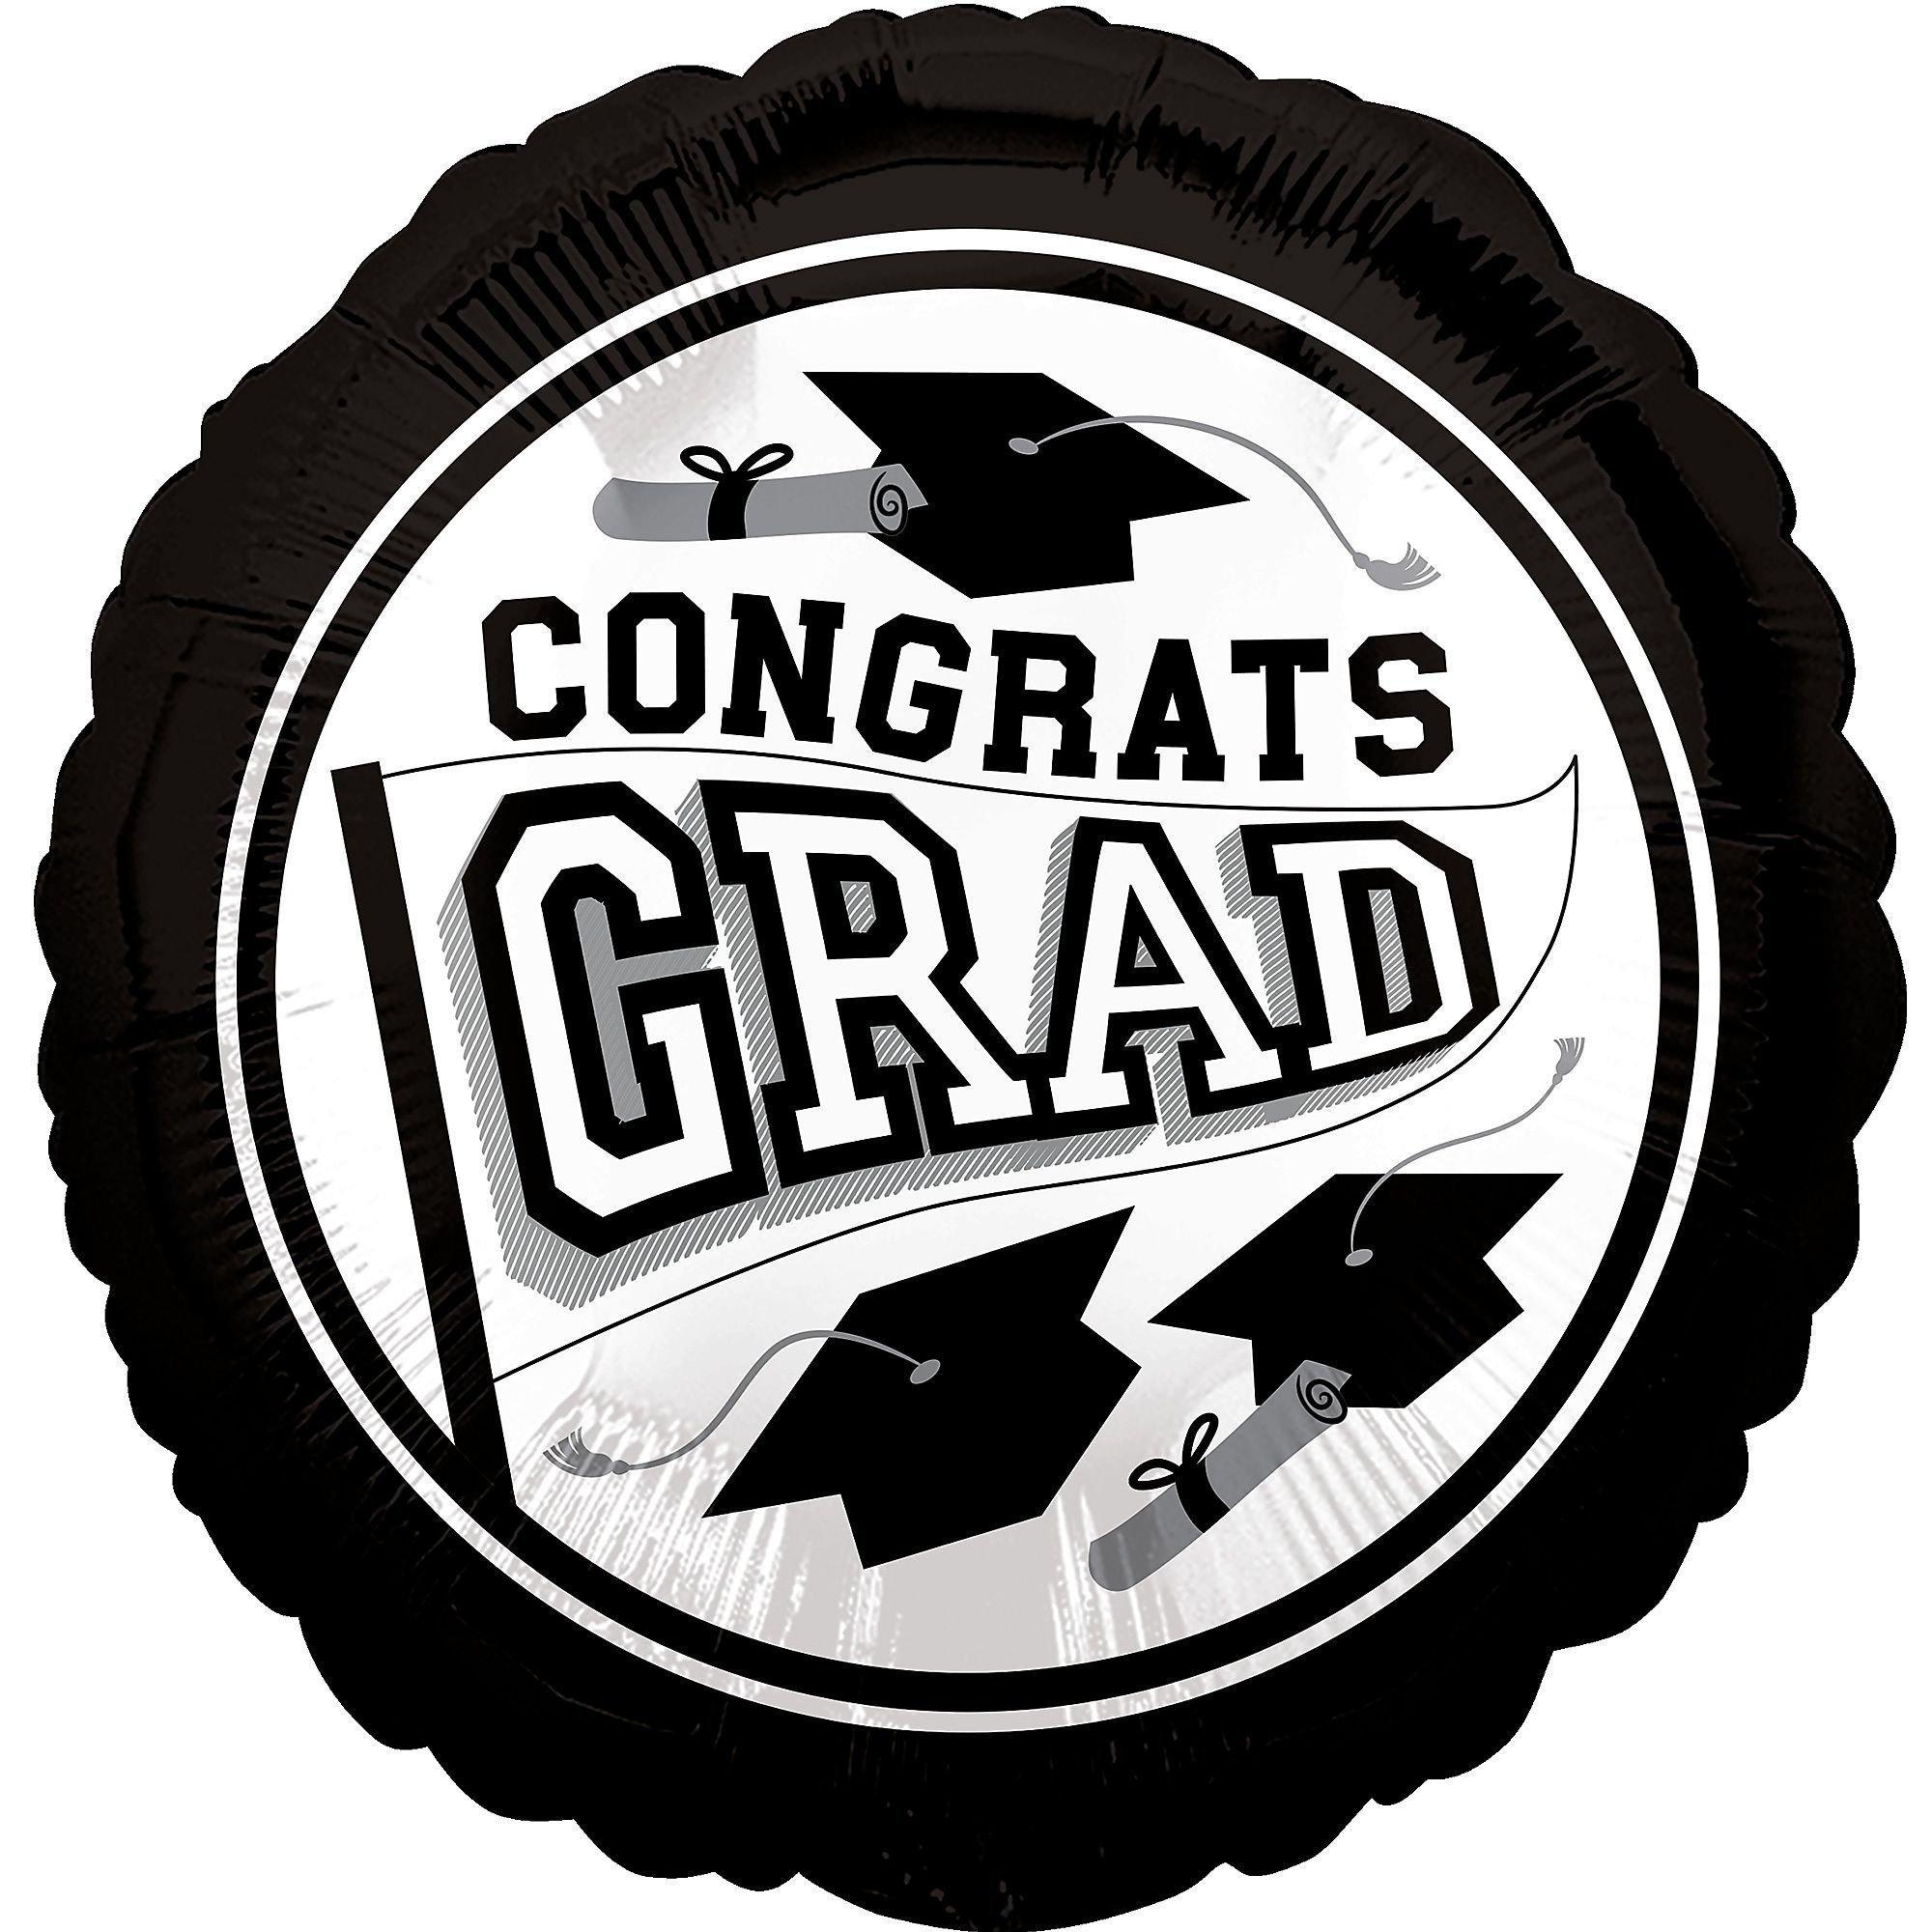 Graduation Party Supplies Kit for 20 with Decorations, Banners, Balloons, Plates, Napkins - White Congrats Grad